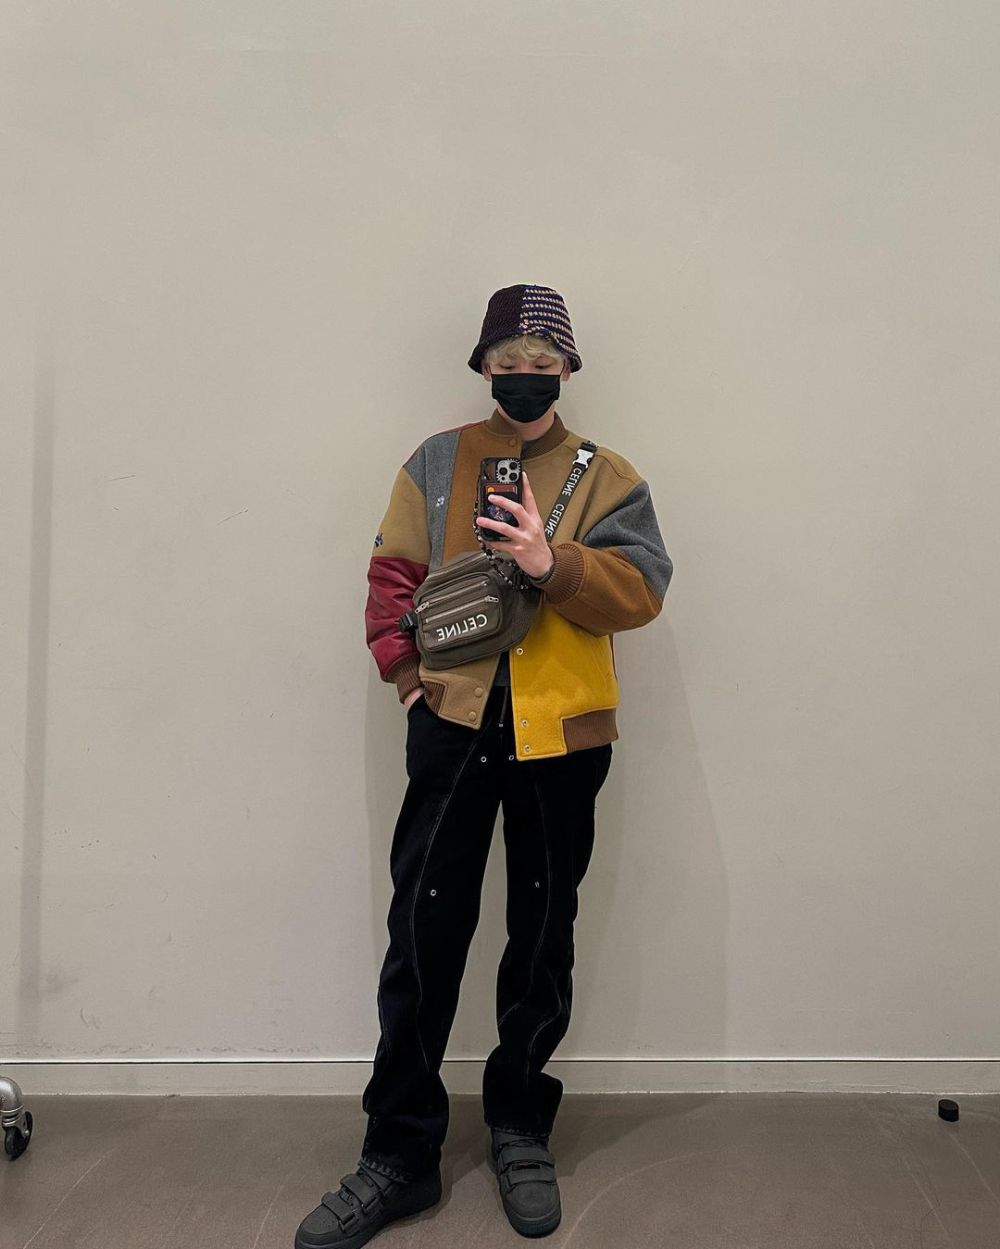 9 Ide Outfit Mirror Selfie ala Key SHINee, Stand Out!